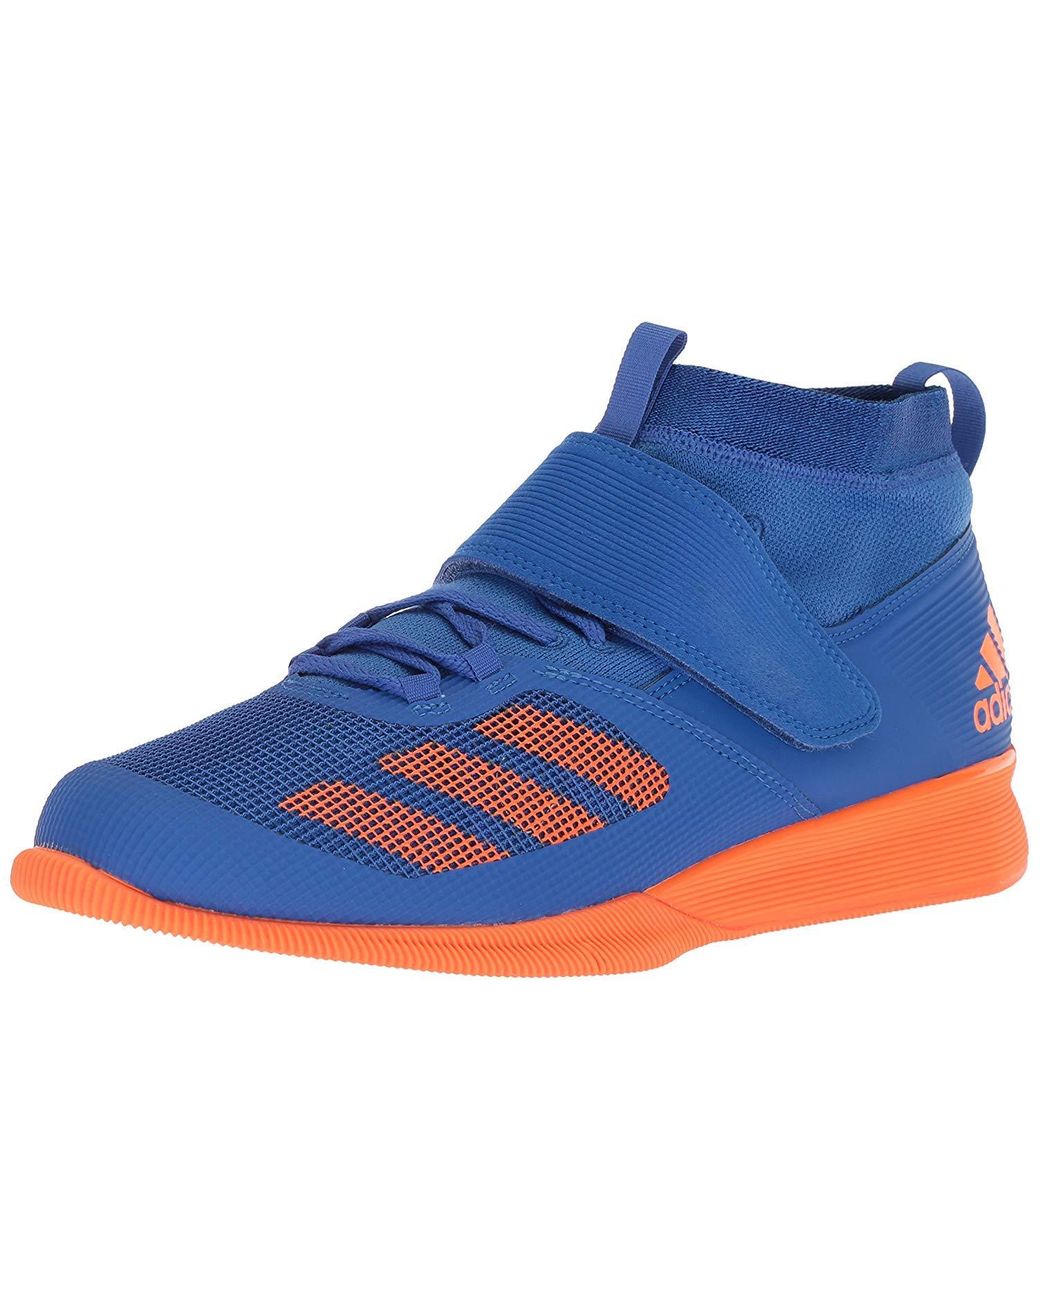 adidas crazy fast trainer, fire sale Save 72% available - mywekutastes.com